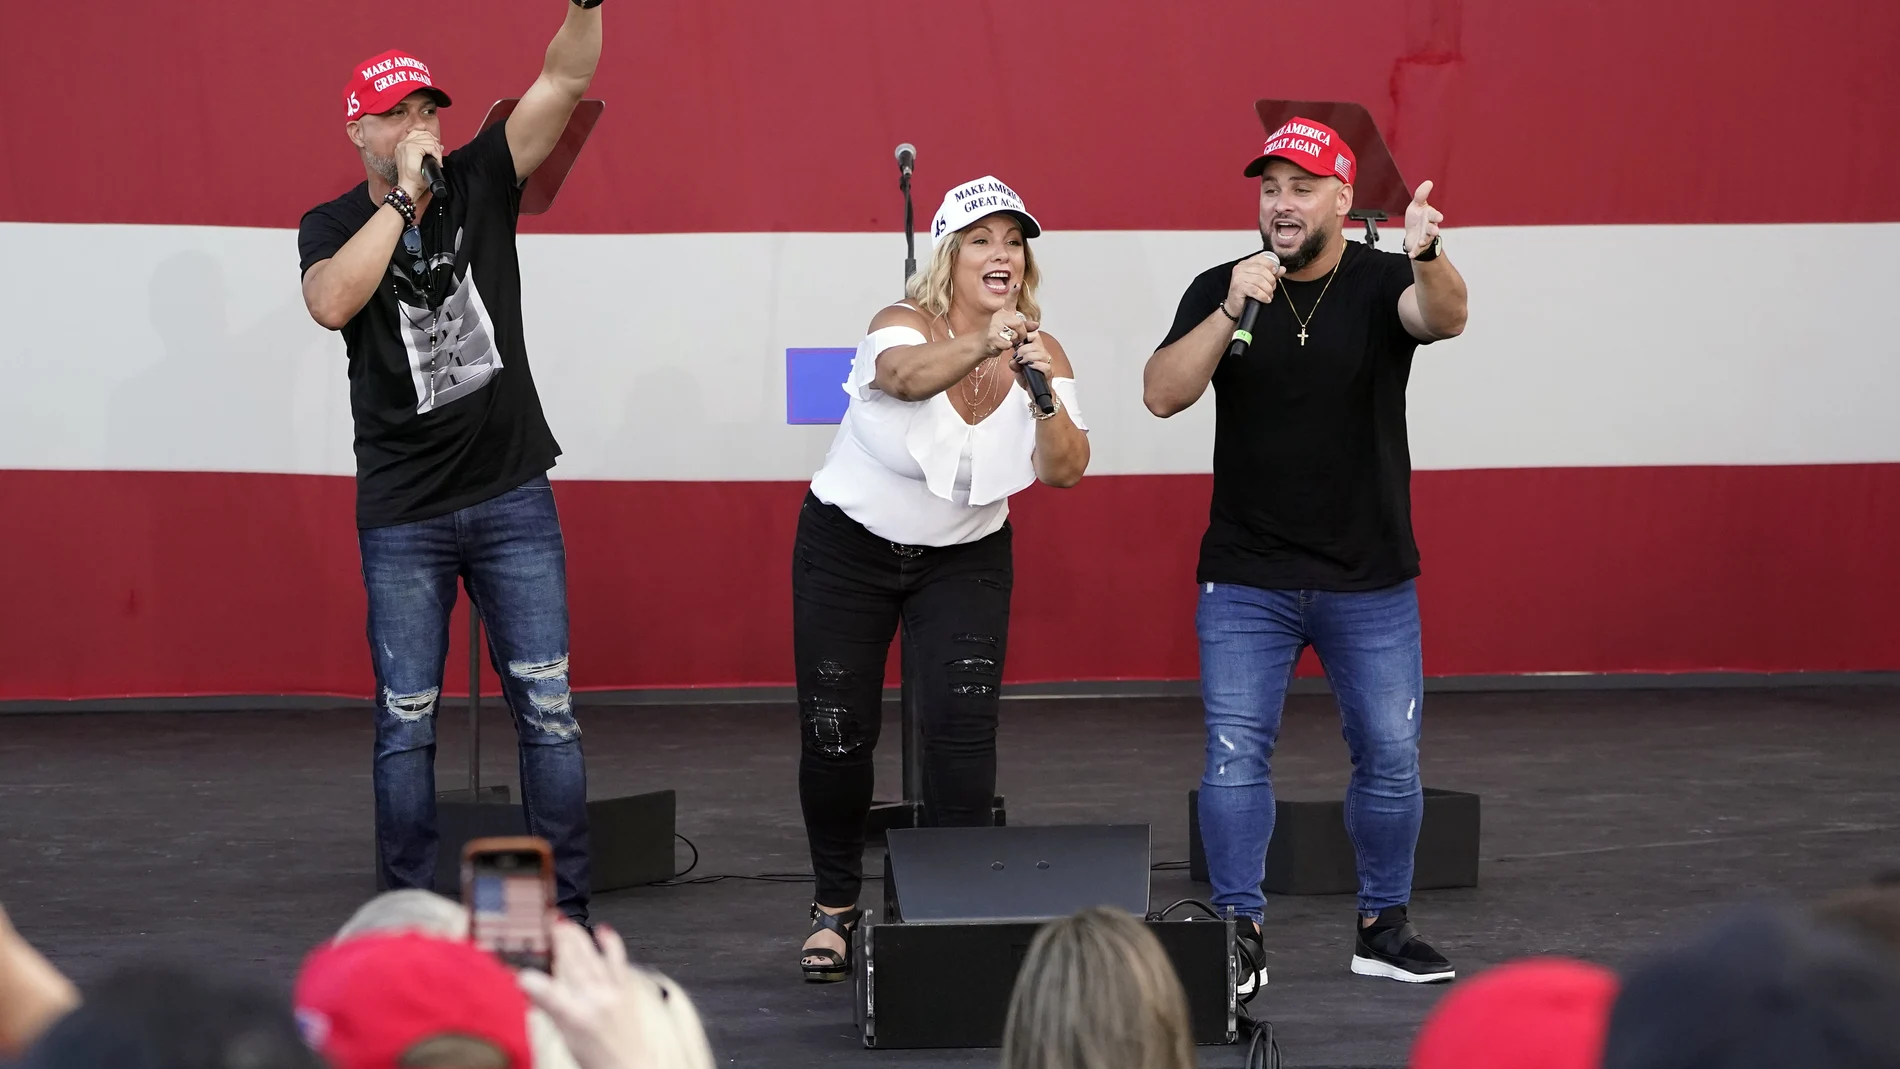 FILE- In this Tuesday, Oct. 27, 2020 file photo, members of the Cuban musical group Los 3 de La Habana, German Pinelli, left, Ana Paez, center, and Tirso Luis, right, sing during a "Make America Great Again!" event with Ivanka Trump at Bayfront Park Amphitheater, in Miami. Florida's Cuban American voters remain a bright spot in Trump's effort to retain his winning coalition from 2016. Polls show his strong support from these key voters may even be growing to include the younger Cuban Americans that Democrats once considered their best hope of breaking the GOP's hold. The musicians say Trumpâ€™s economic and foreign policies have been his main achievements. (AP Photo/Wilfredo Lee, File)